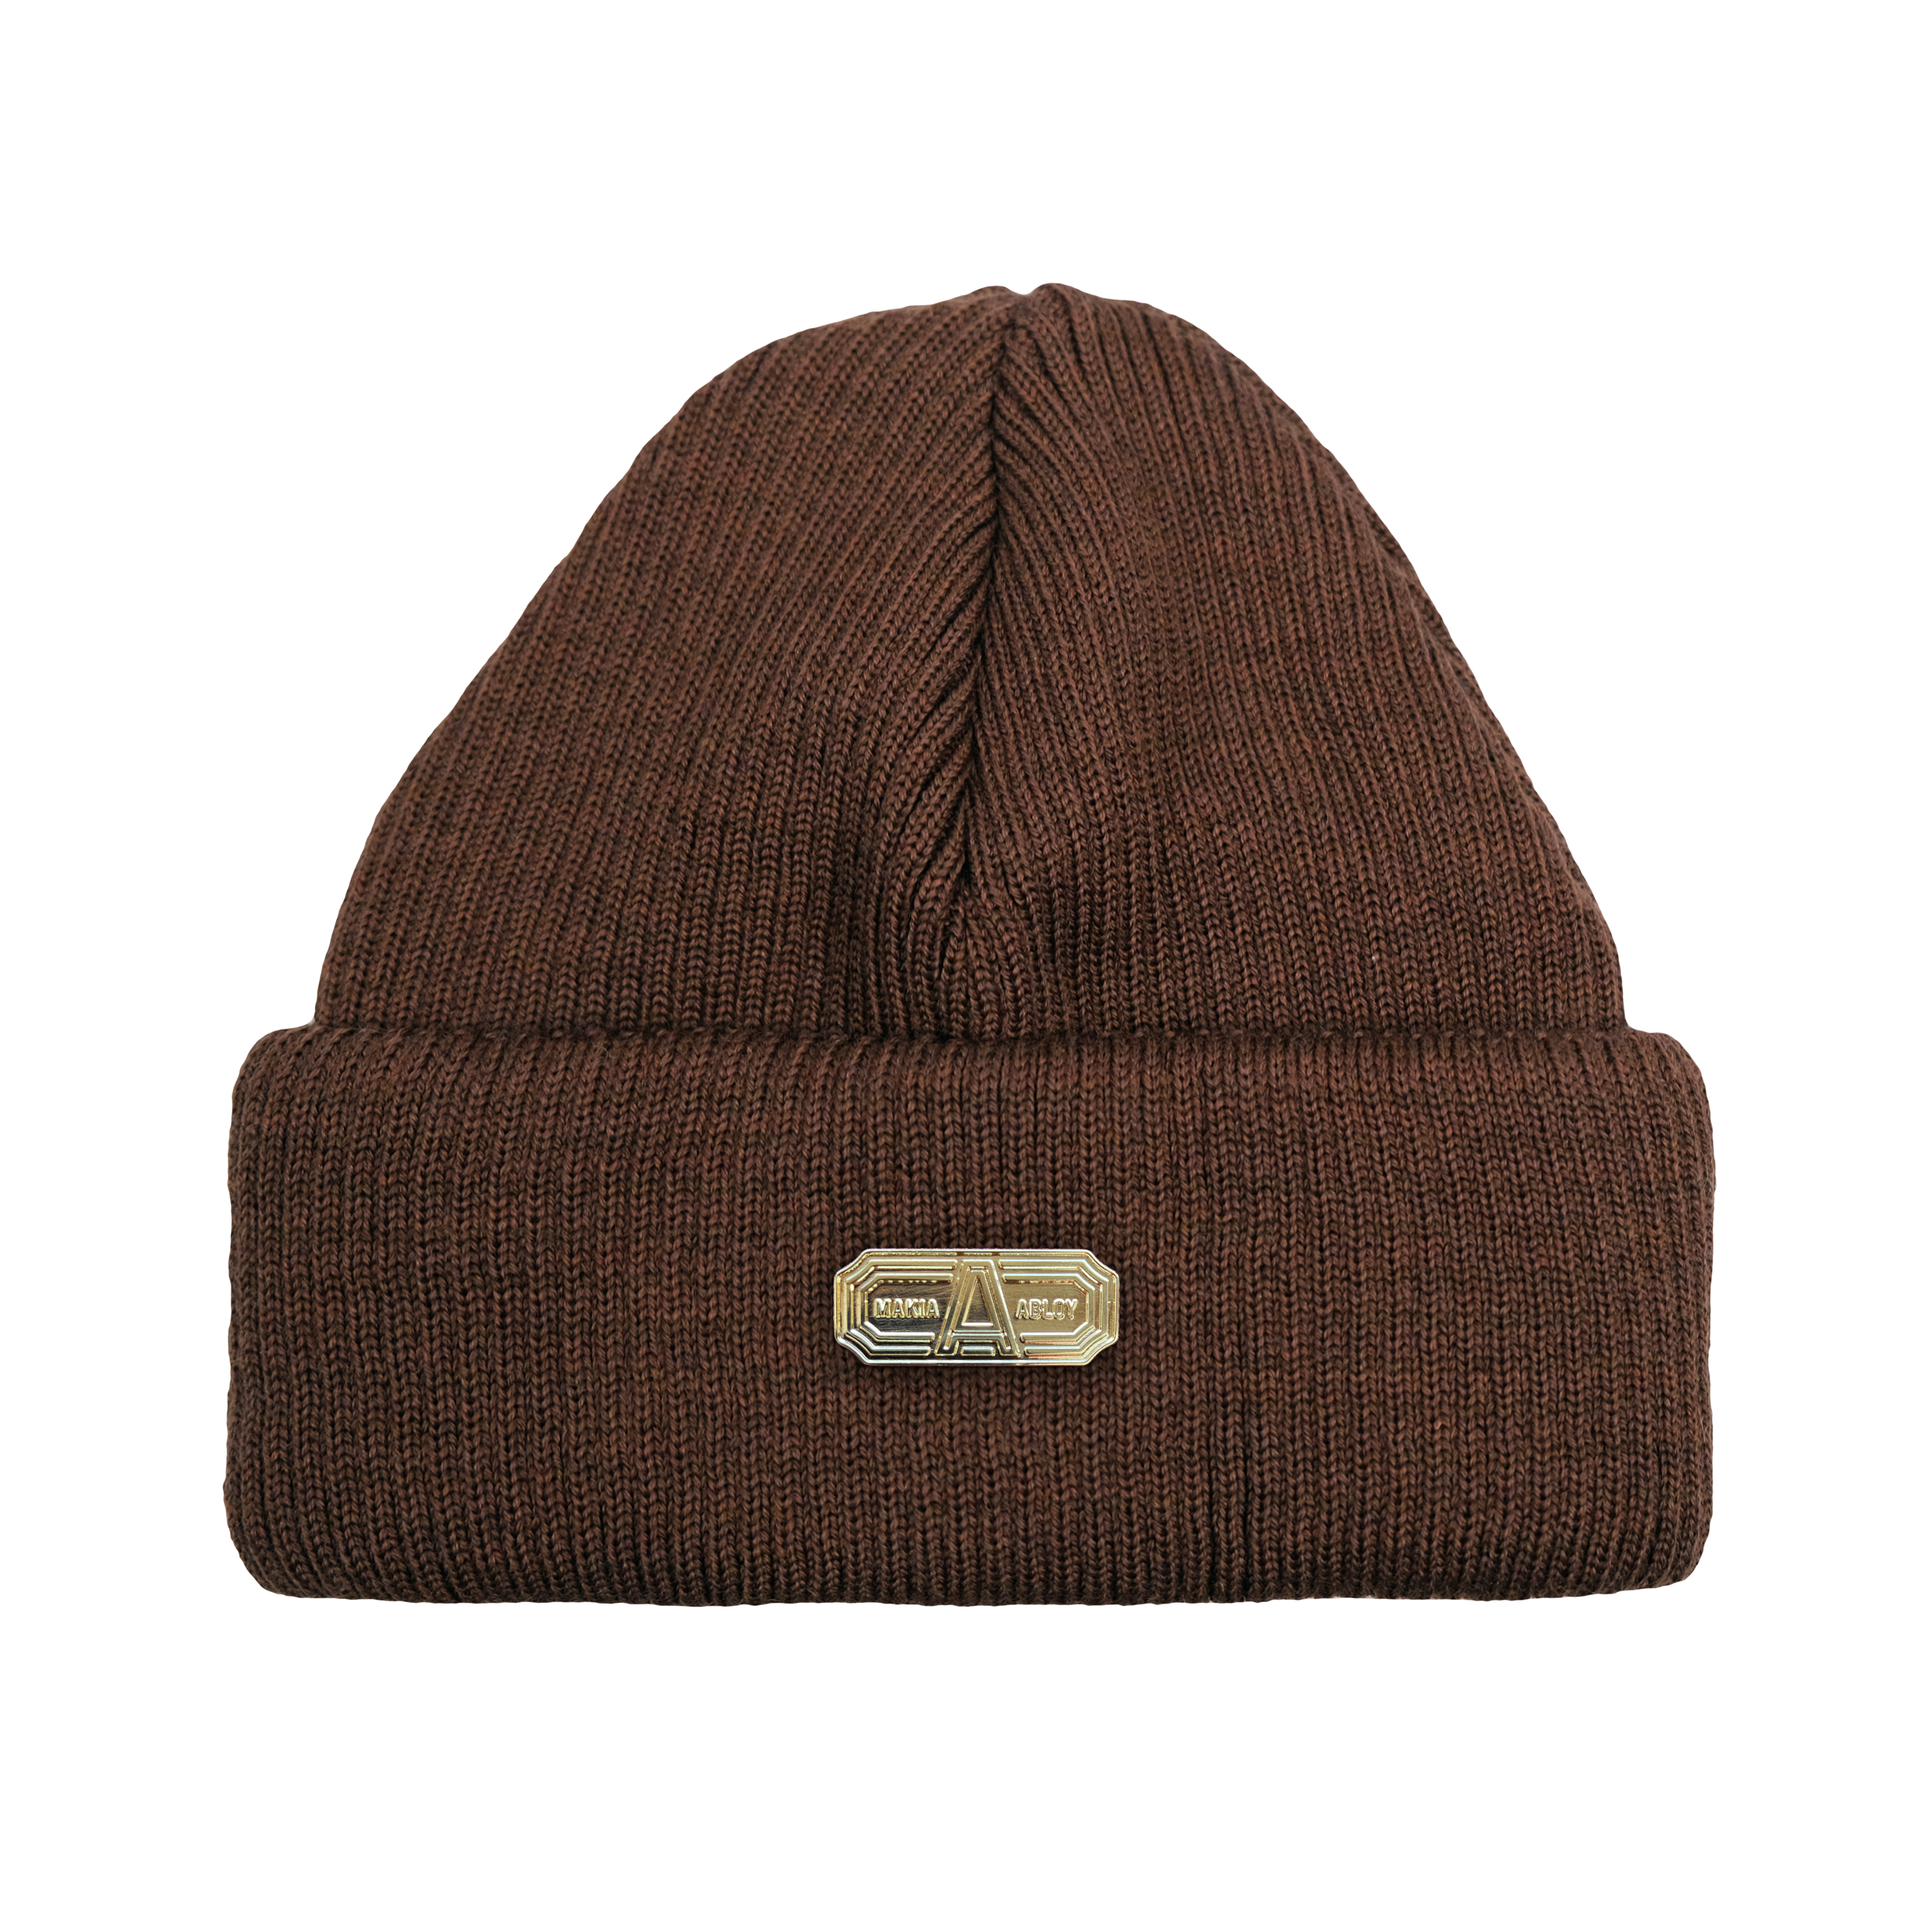 Ribbed Merino wool beanie with Collaboration branding.